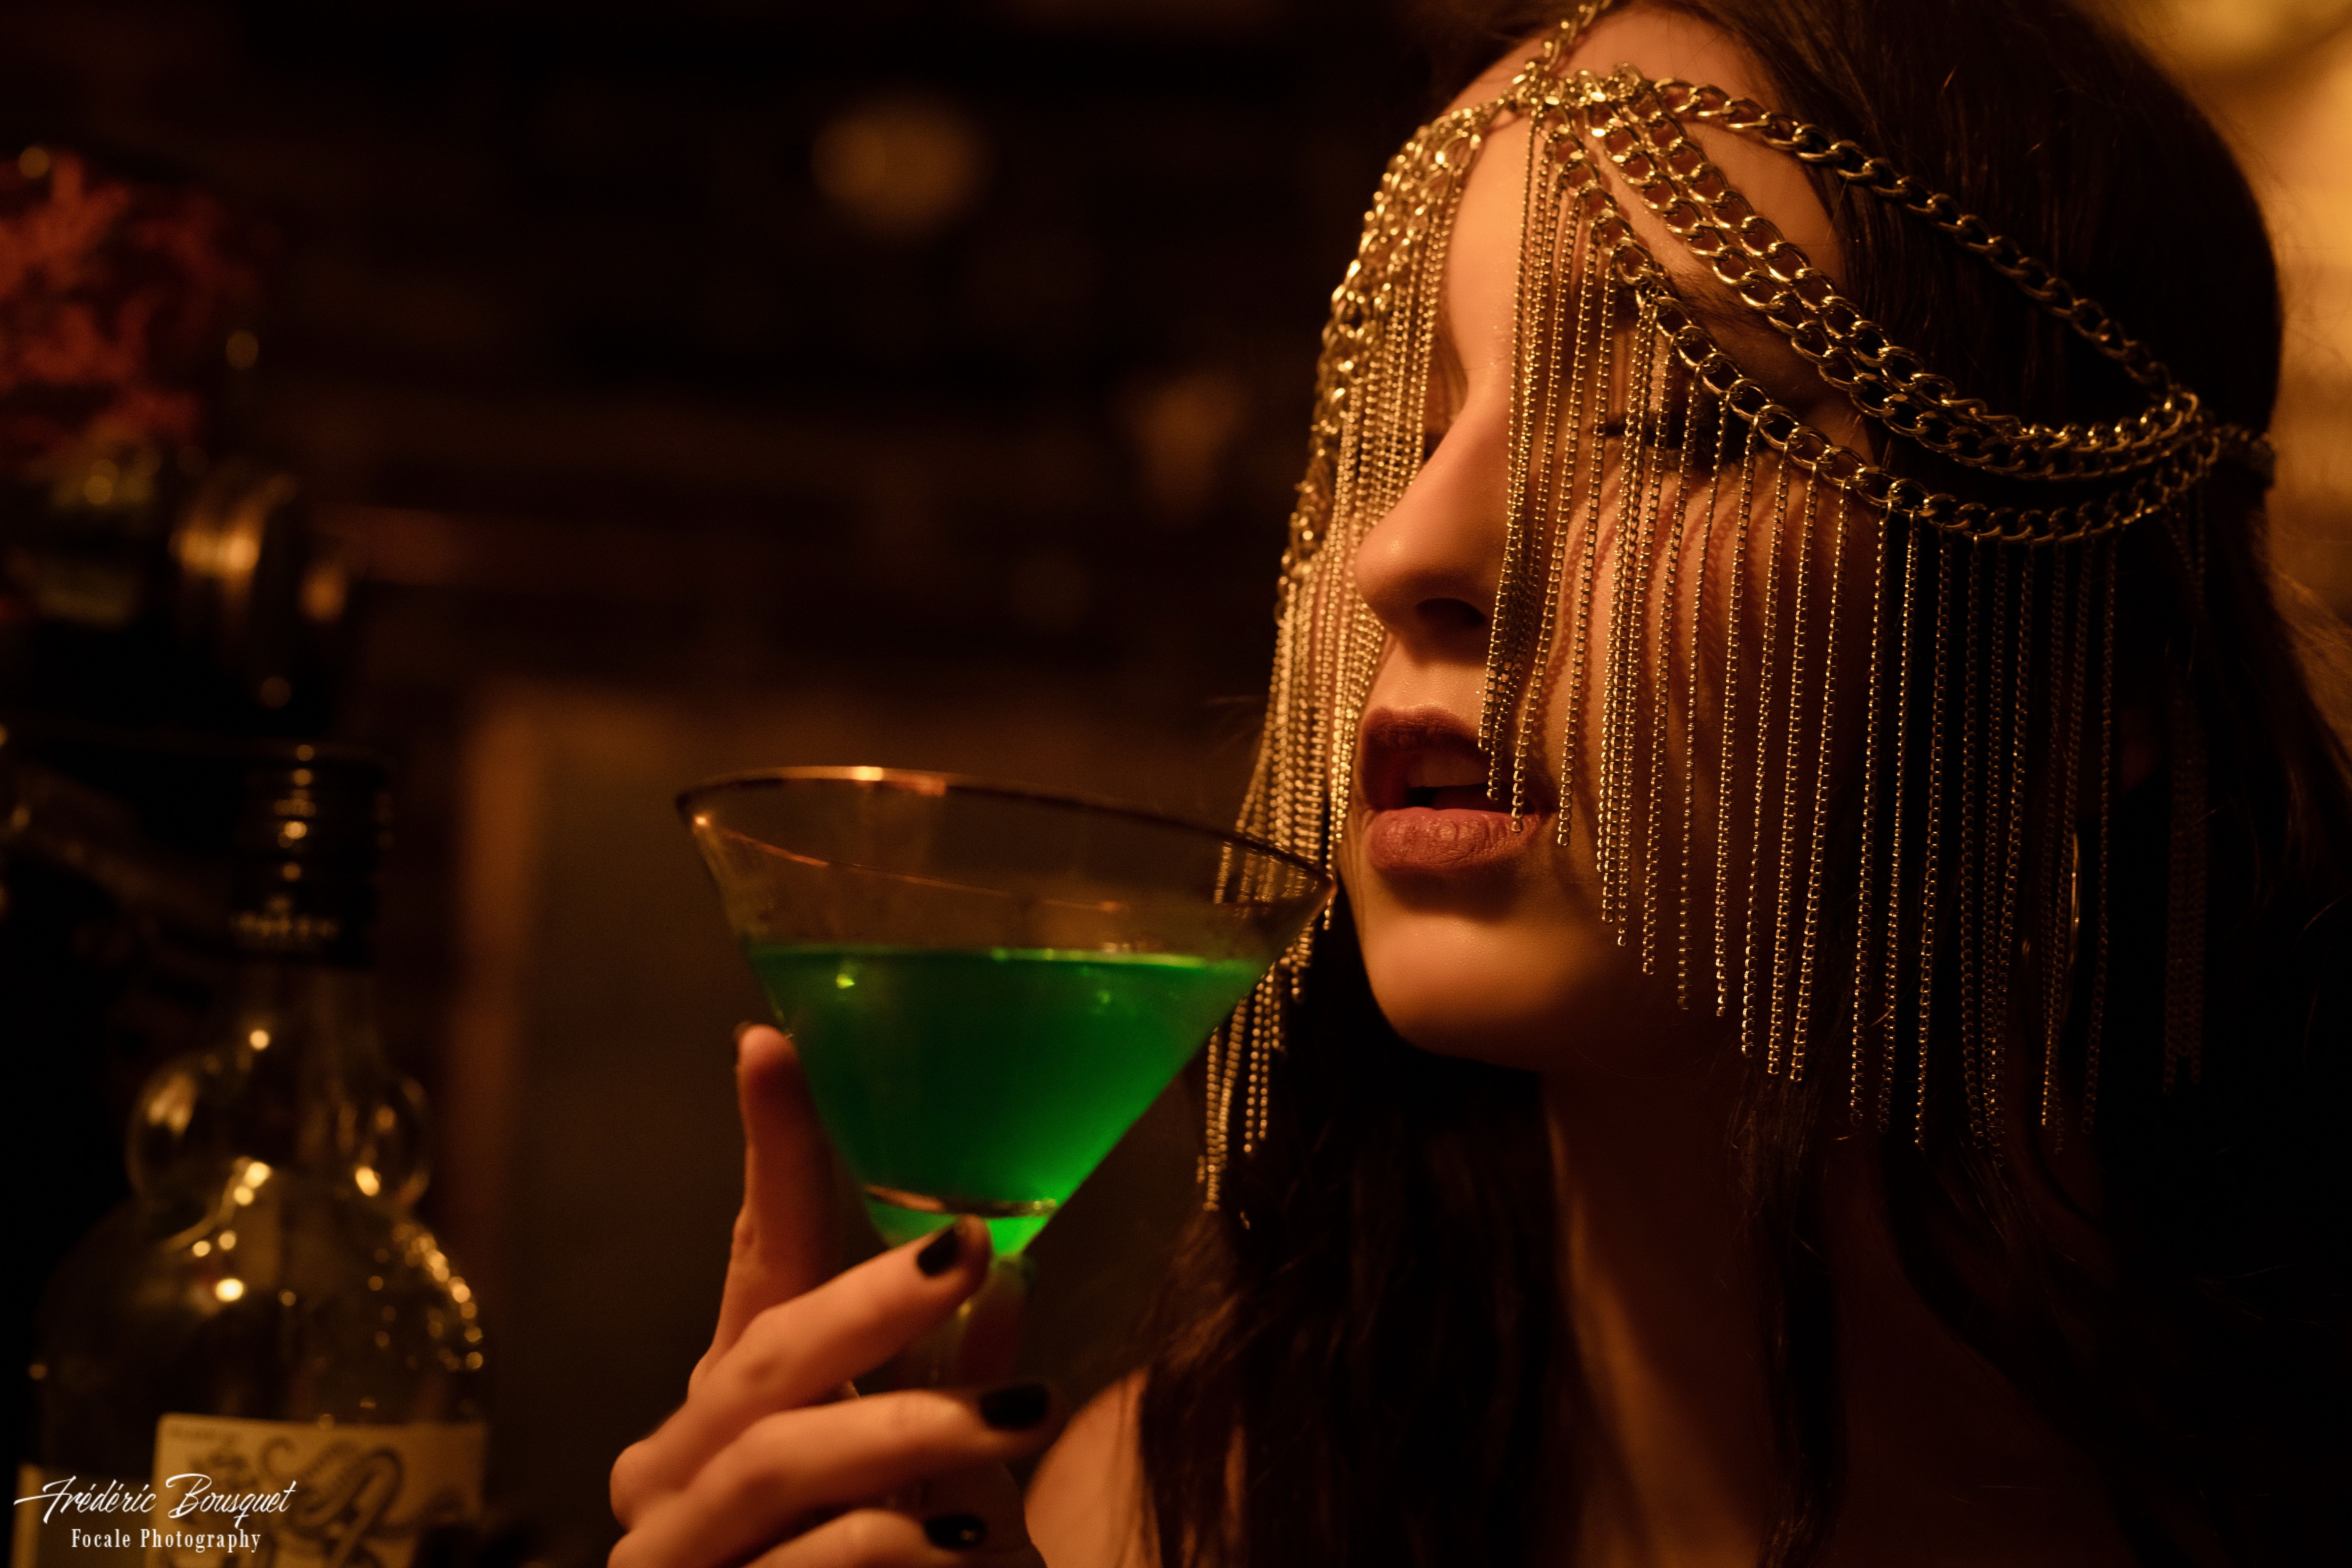 Free Image, girl, woman, wallpaper, , body, green, alcohol, drink, bar, distilled beverage, liqueur, night, glass, darkness, champagne stemware 5800x3867